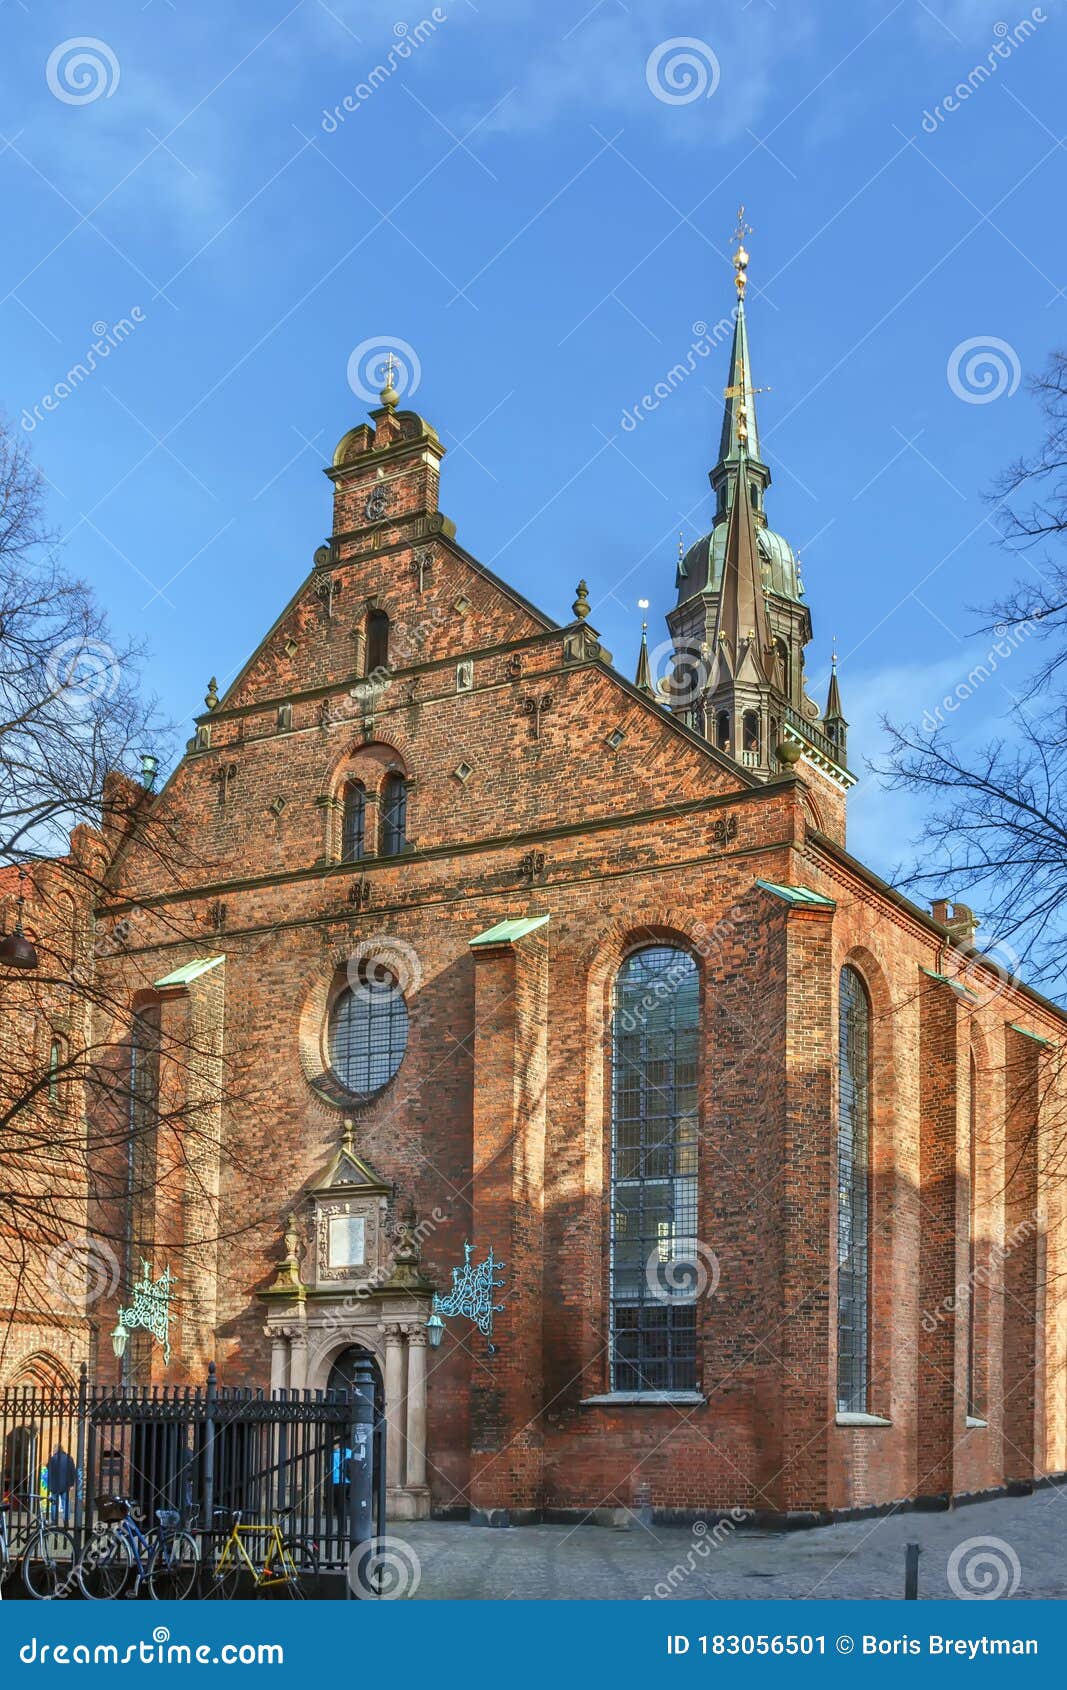 Church of the Holy Ghost, Denmark Image - Image of architecture, landmark: 183056501